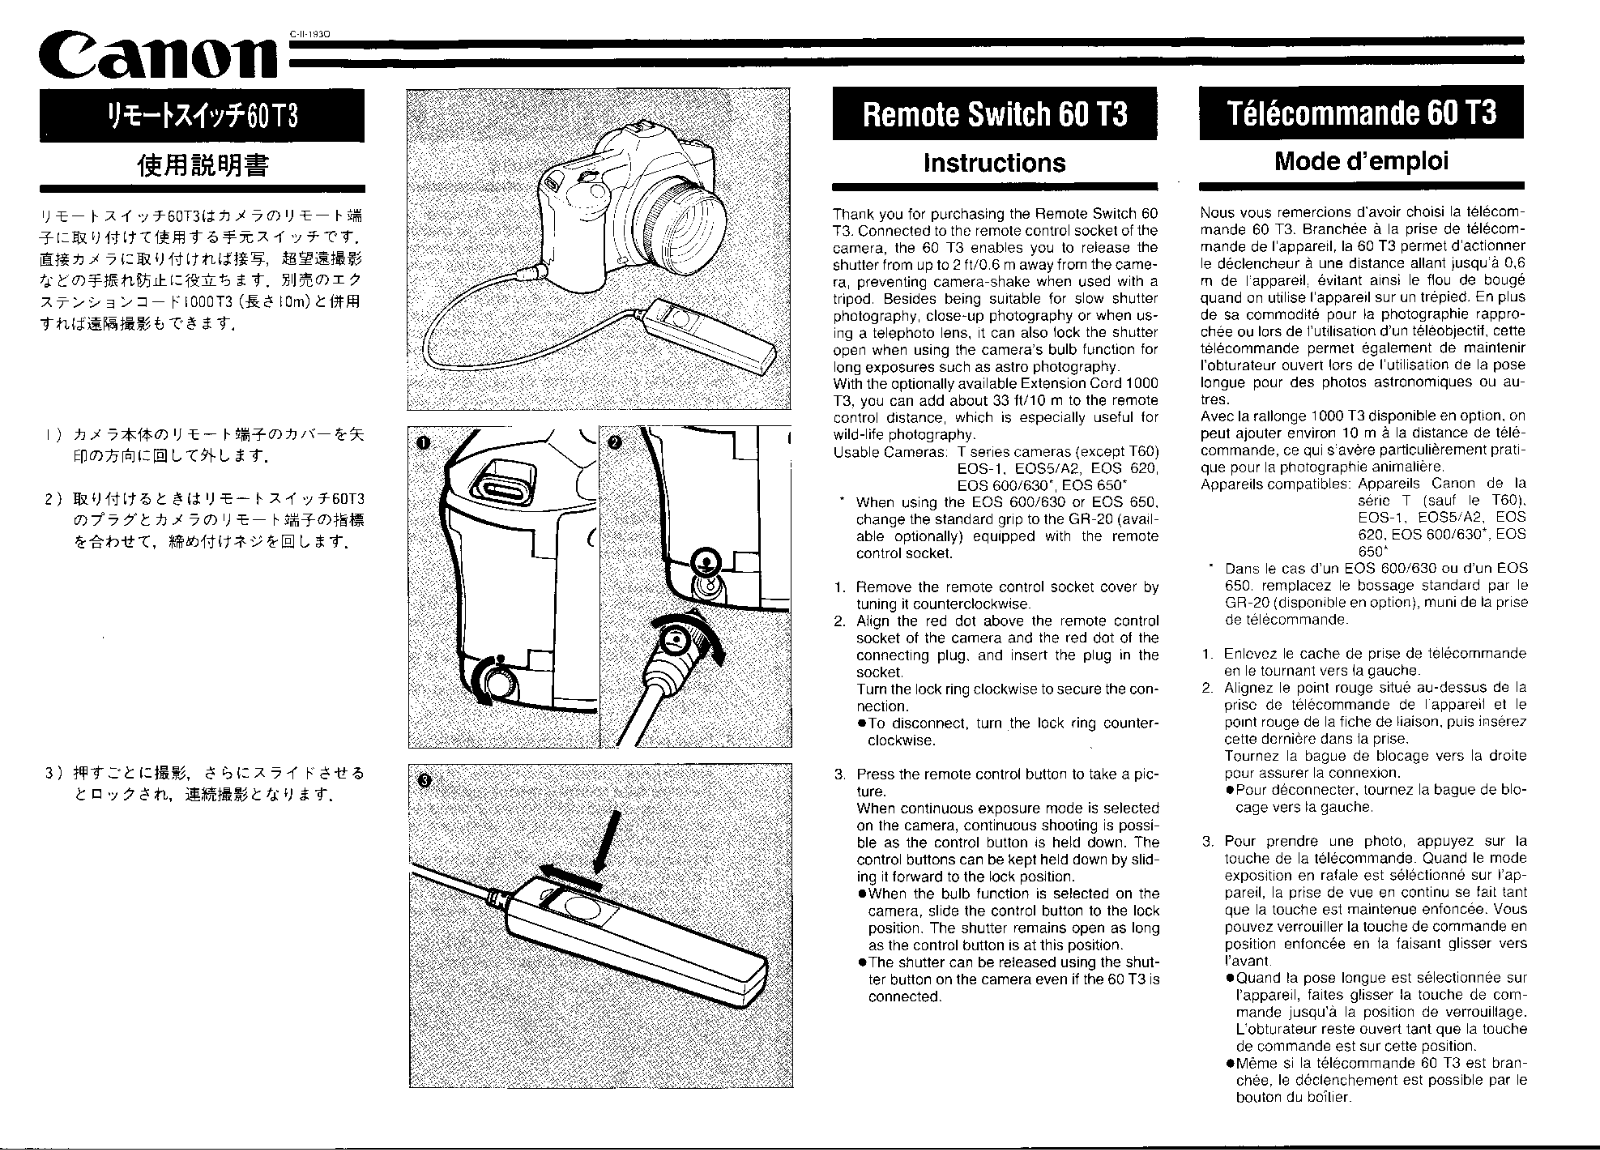 Canon remote switch 60 Instruction Manual